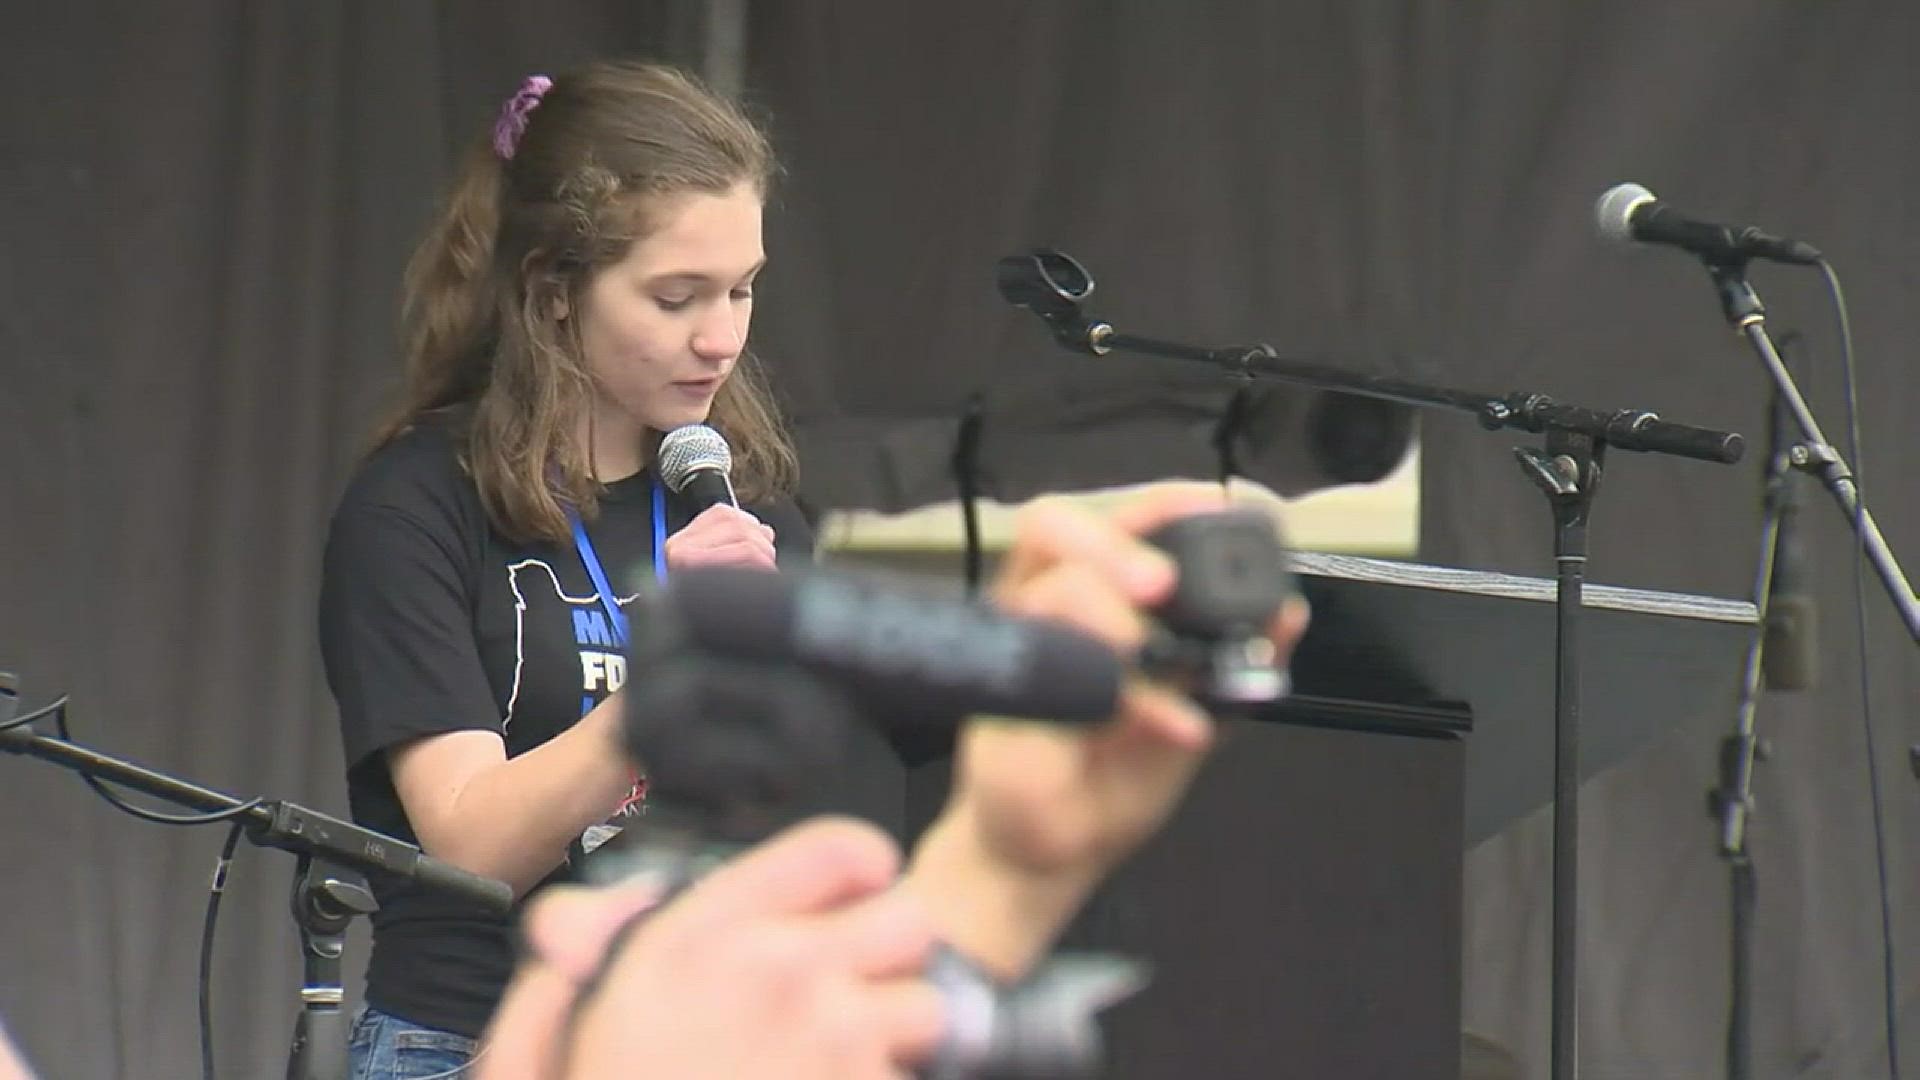 Student organizer Eliana Andrews says people must demand change to prevent gun violence during her speech at Portland's March for Our Lives rally.